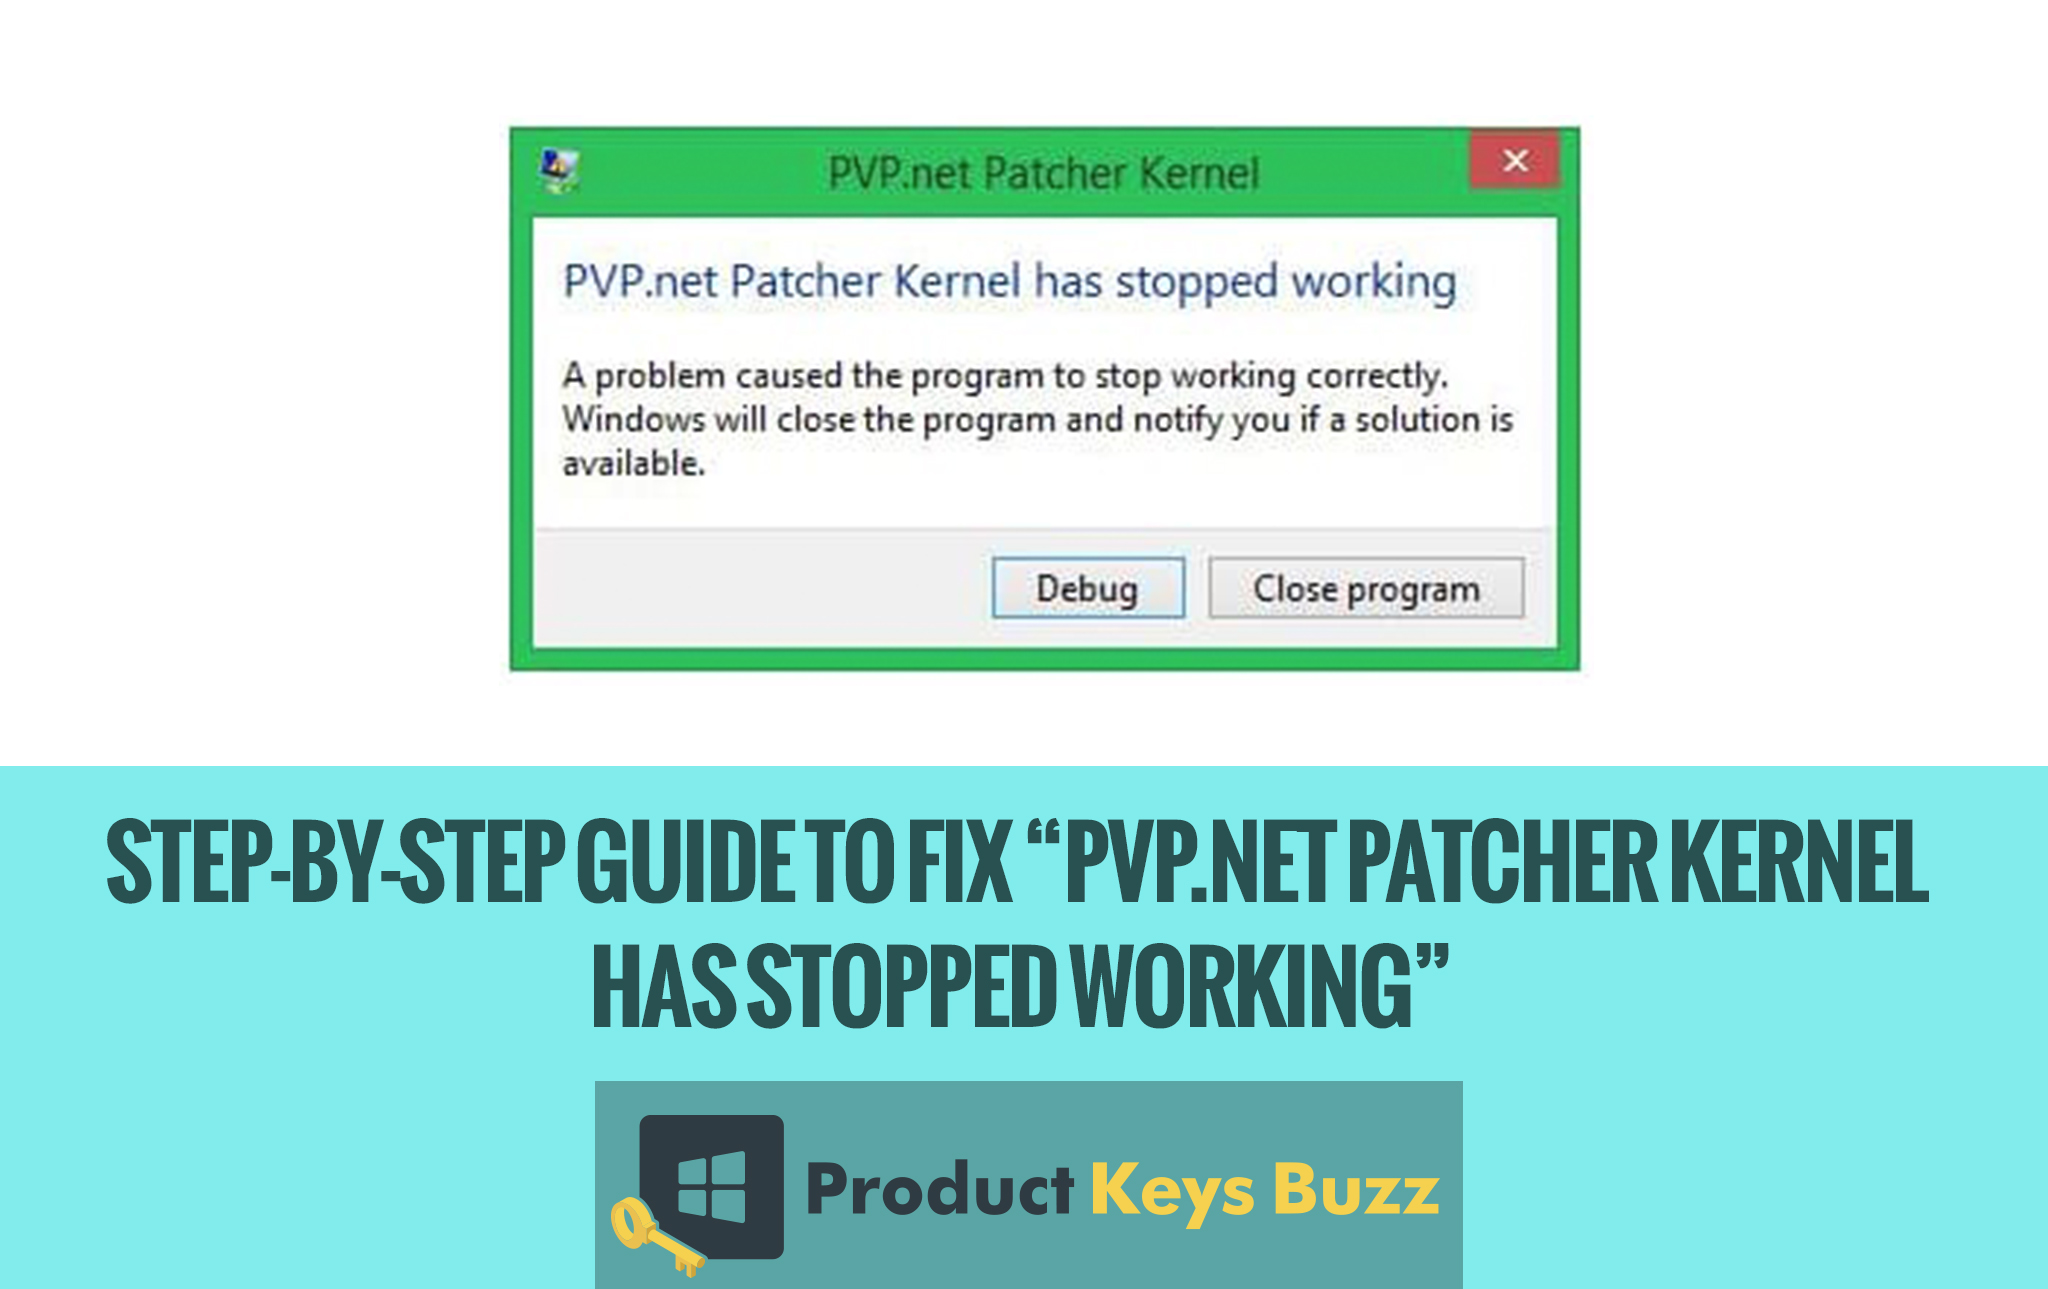 Step-by-Step Guide to Fix “pvp.net patcher kernel has stopped working”